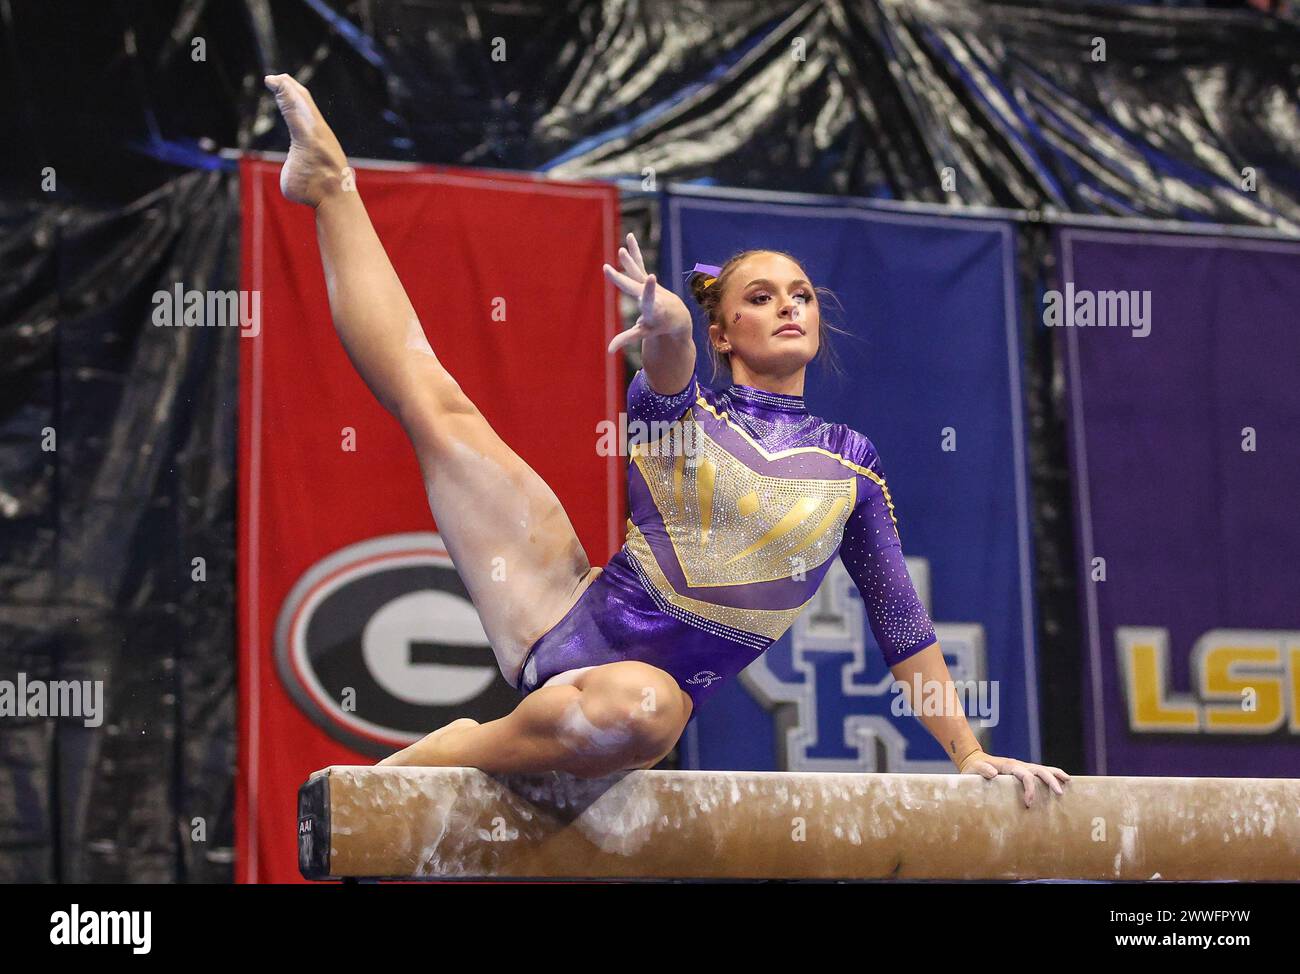 March 23, 2024: LSU's Savannah Schoenherr competes on the balance beam during the 2024 SEC Gymnastics Championships at Smoothie King Center in New Orleans, LA Kyle Okita/CSM (Credit Image: © Kyle Okita/Cal Sport Media) Stock Photo